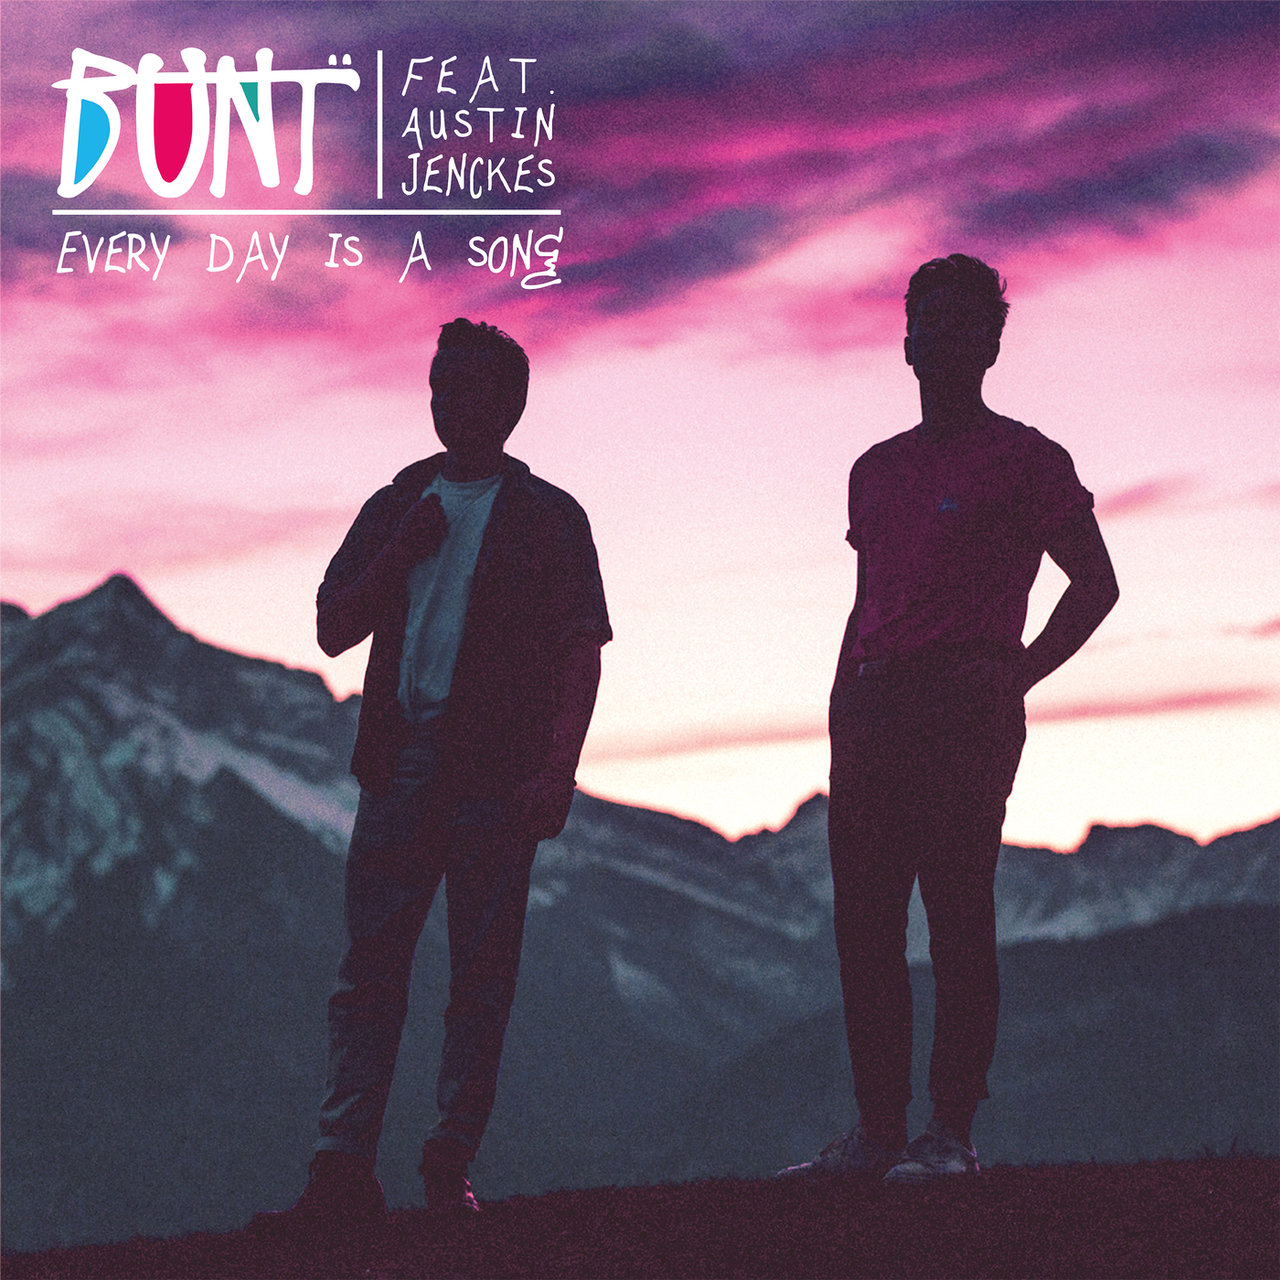 BUNT. ft. featuring Austin Jenckes Every Day Is A Song cover artwork